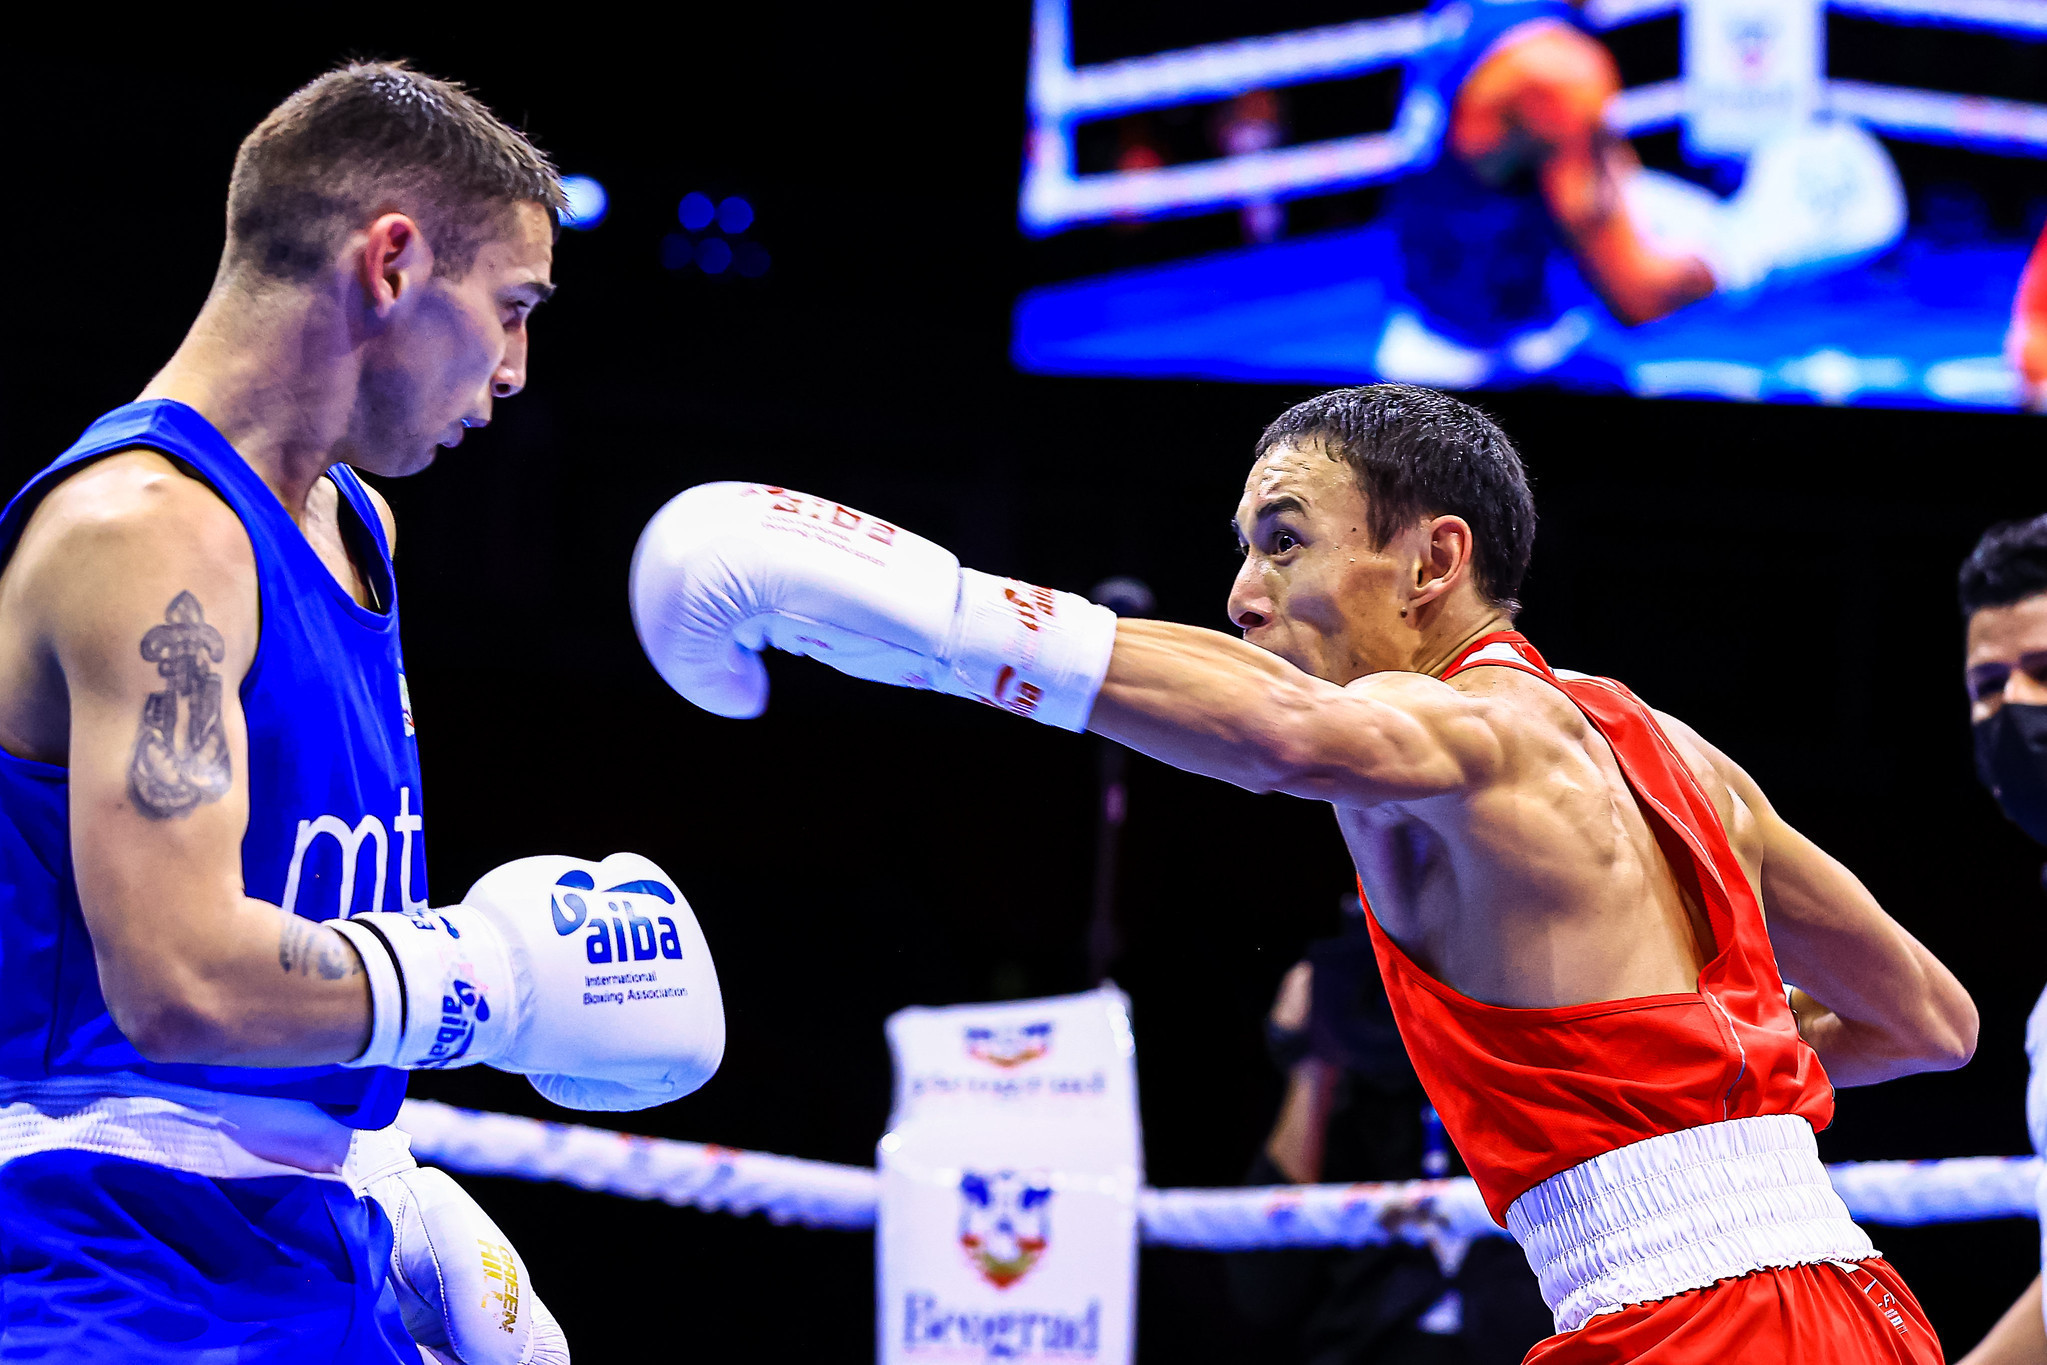 Kazakhstan's Temirtas Zhussupov defeated Omer Ametovic of Serbia today ©AIBA